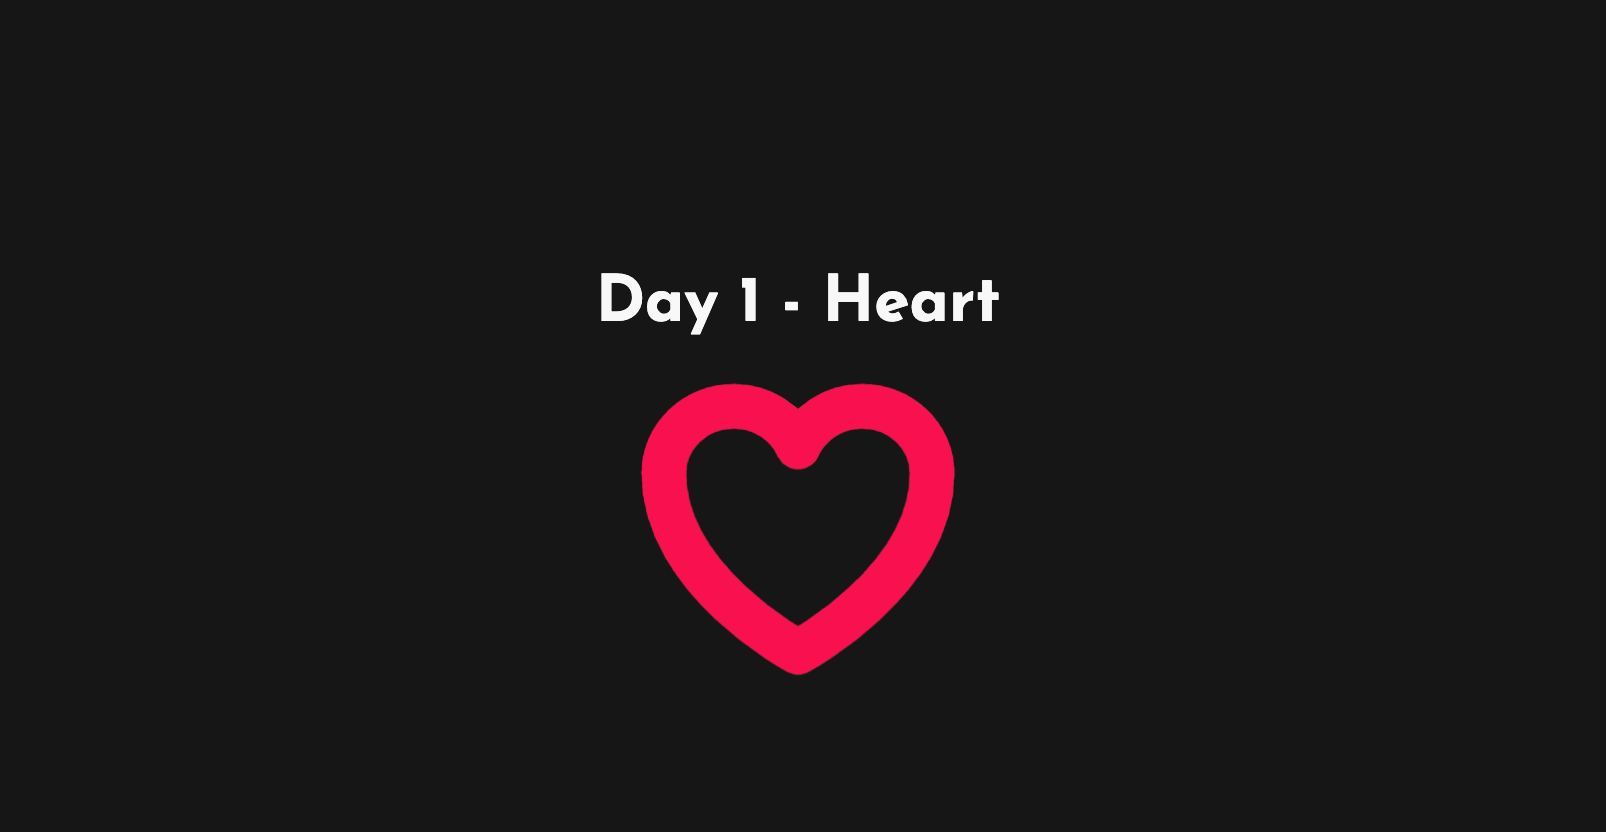 learn-css-animations/day1-heart